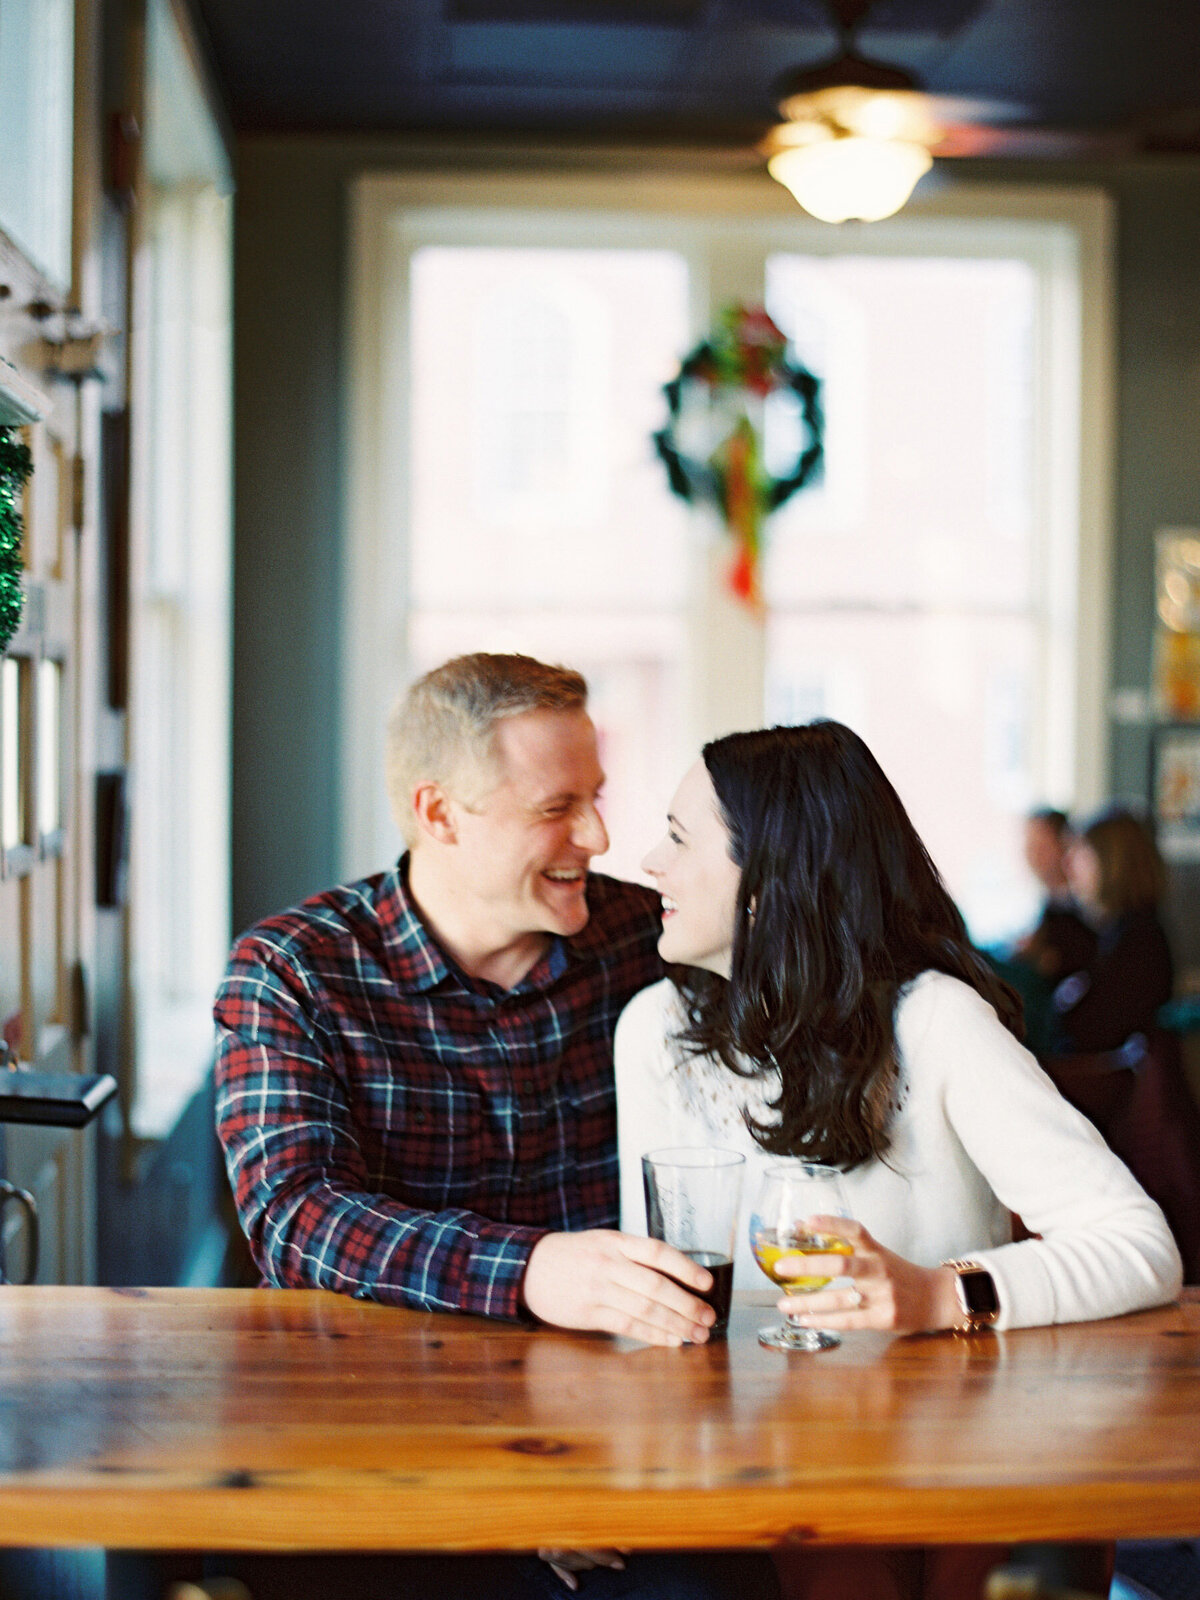 charleston-fall-engagement-photos-by-philip-casey-017